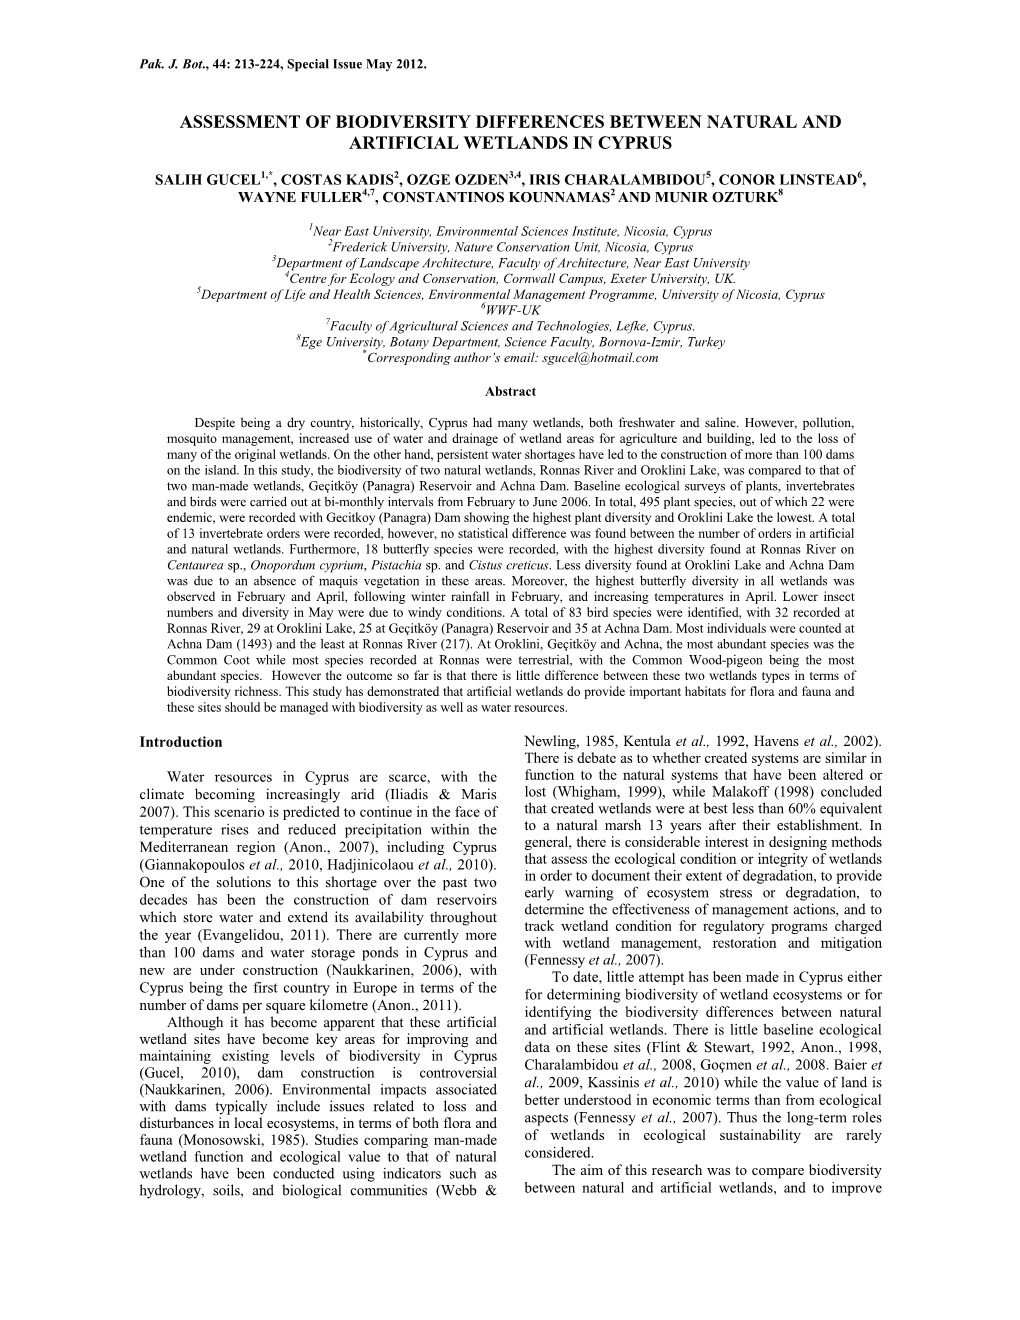 Assessment of Biodiversity Differences Between Natural and Artificial Wetlands in Cyprus